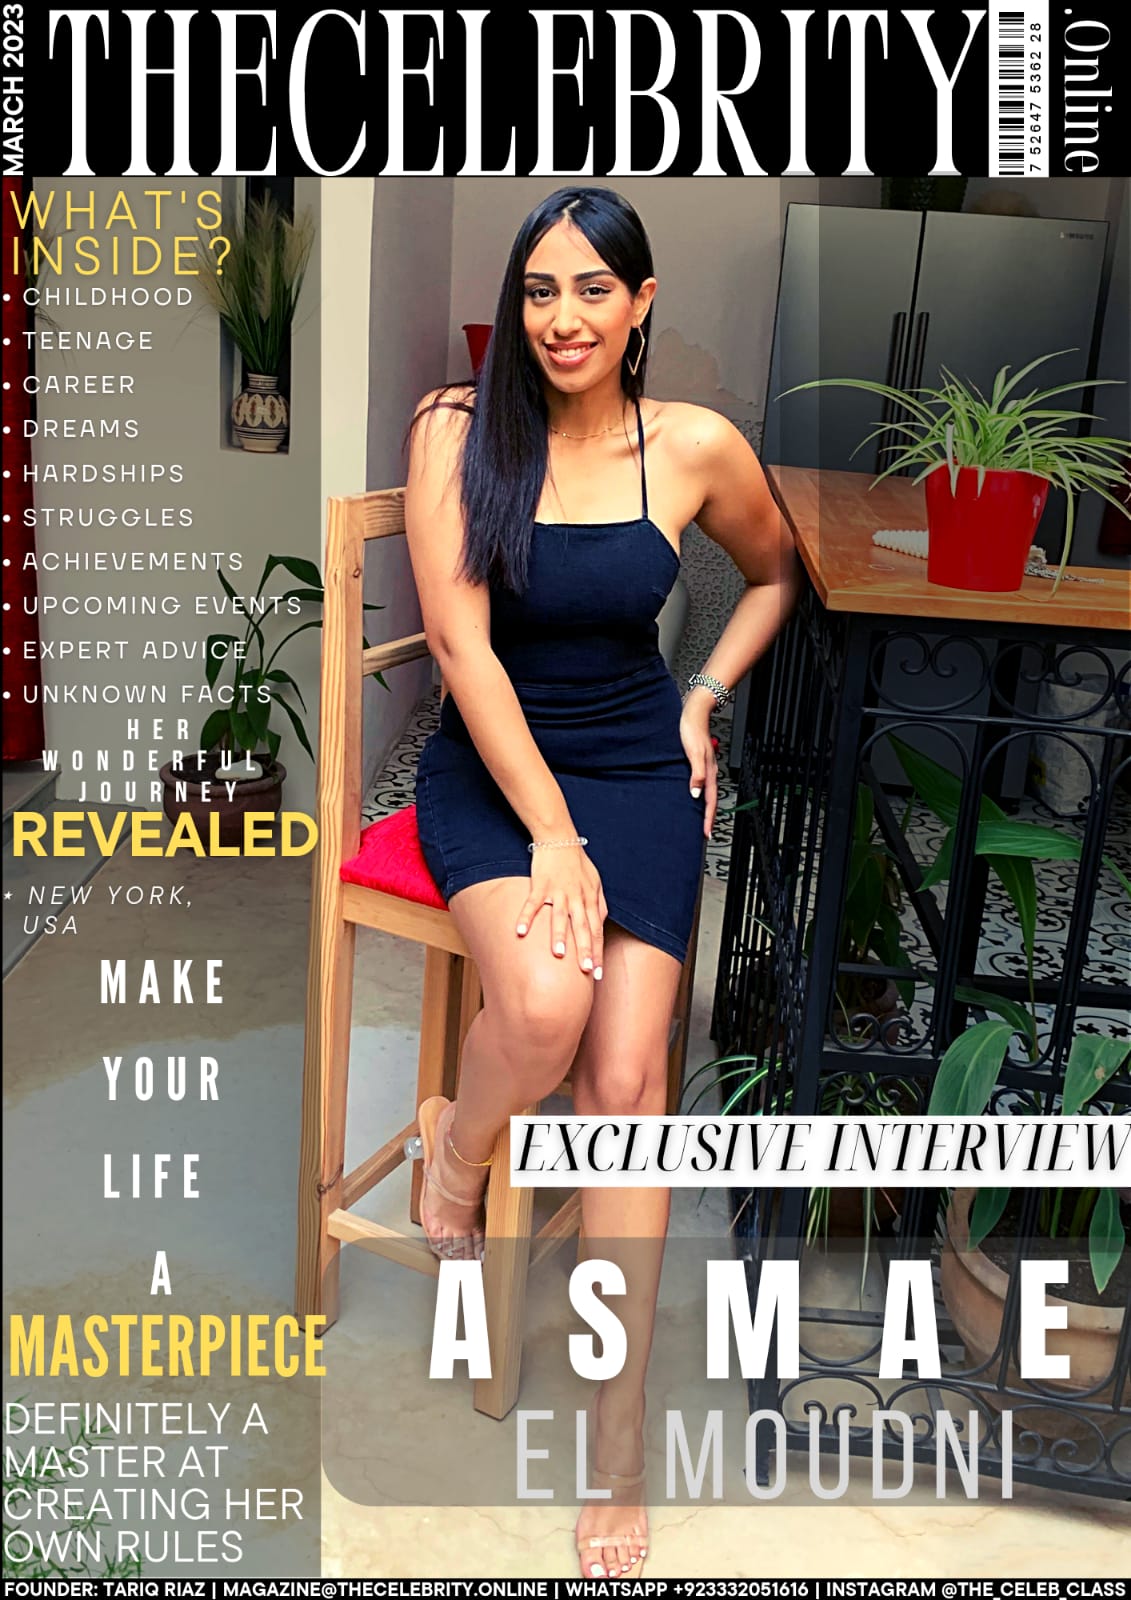 Asmae El Moudni Exclusive Interview – ‘Stay true to yourself and stick to your dreams’